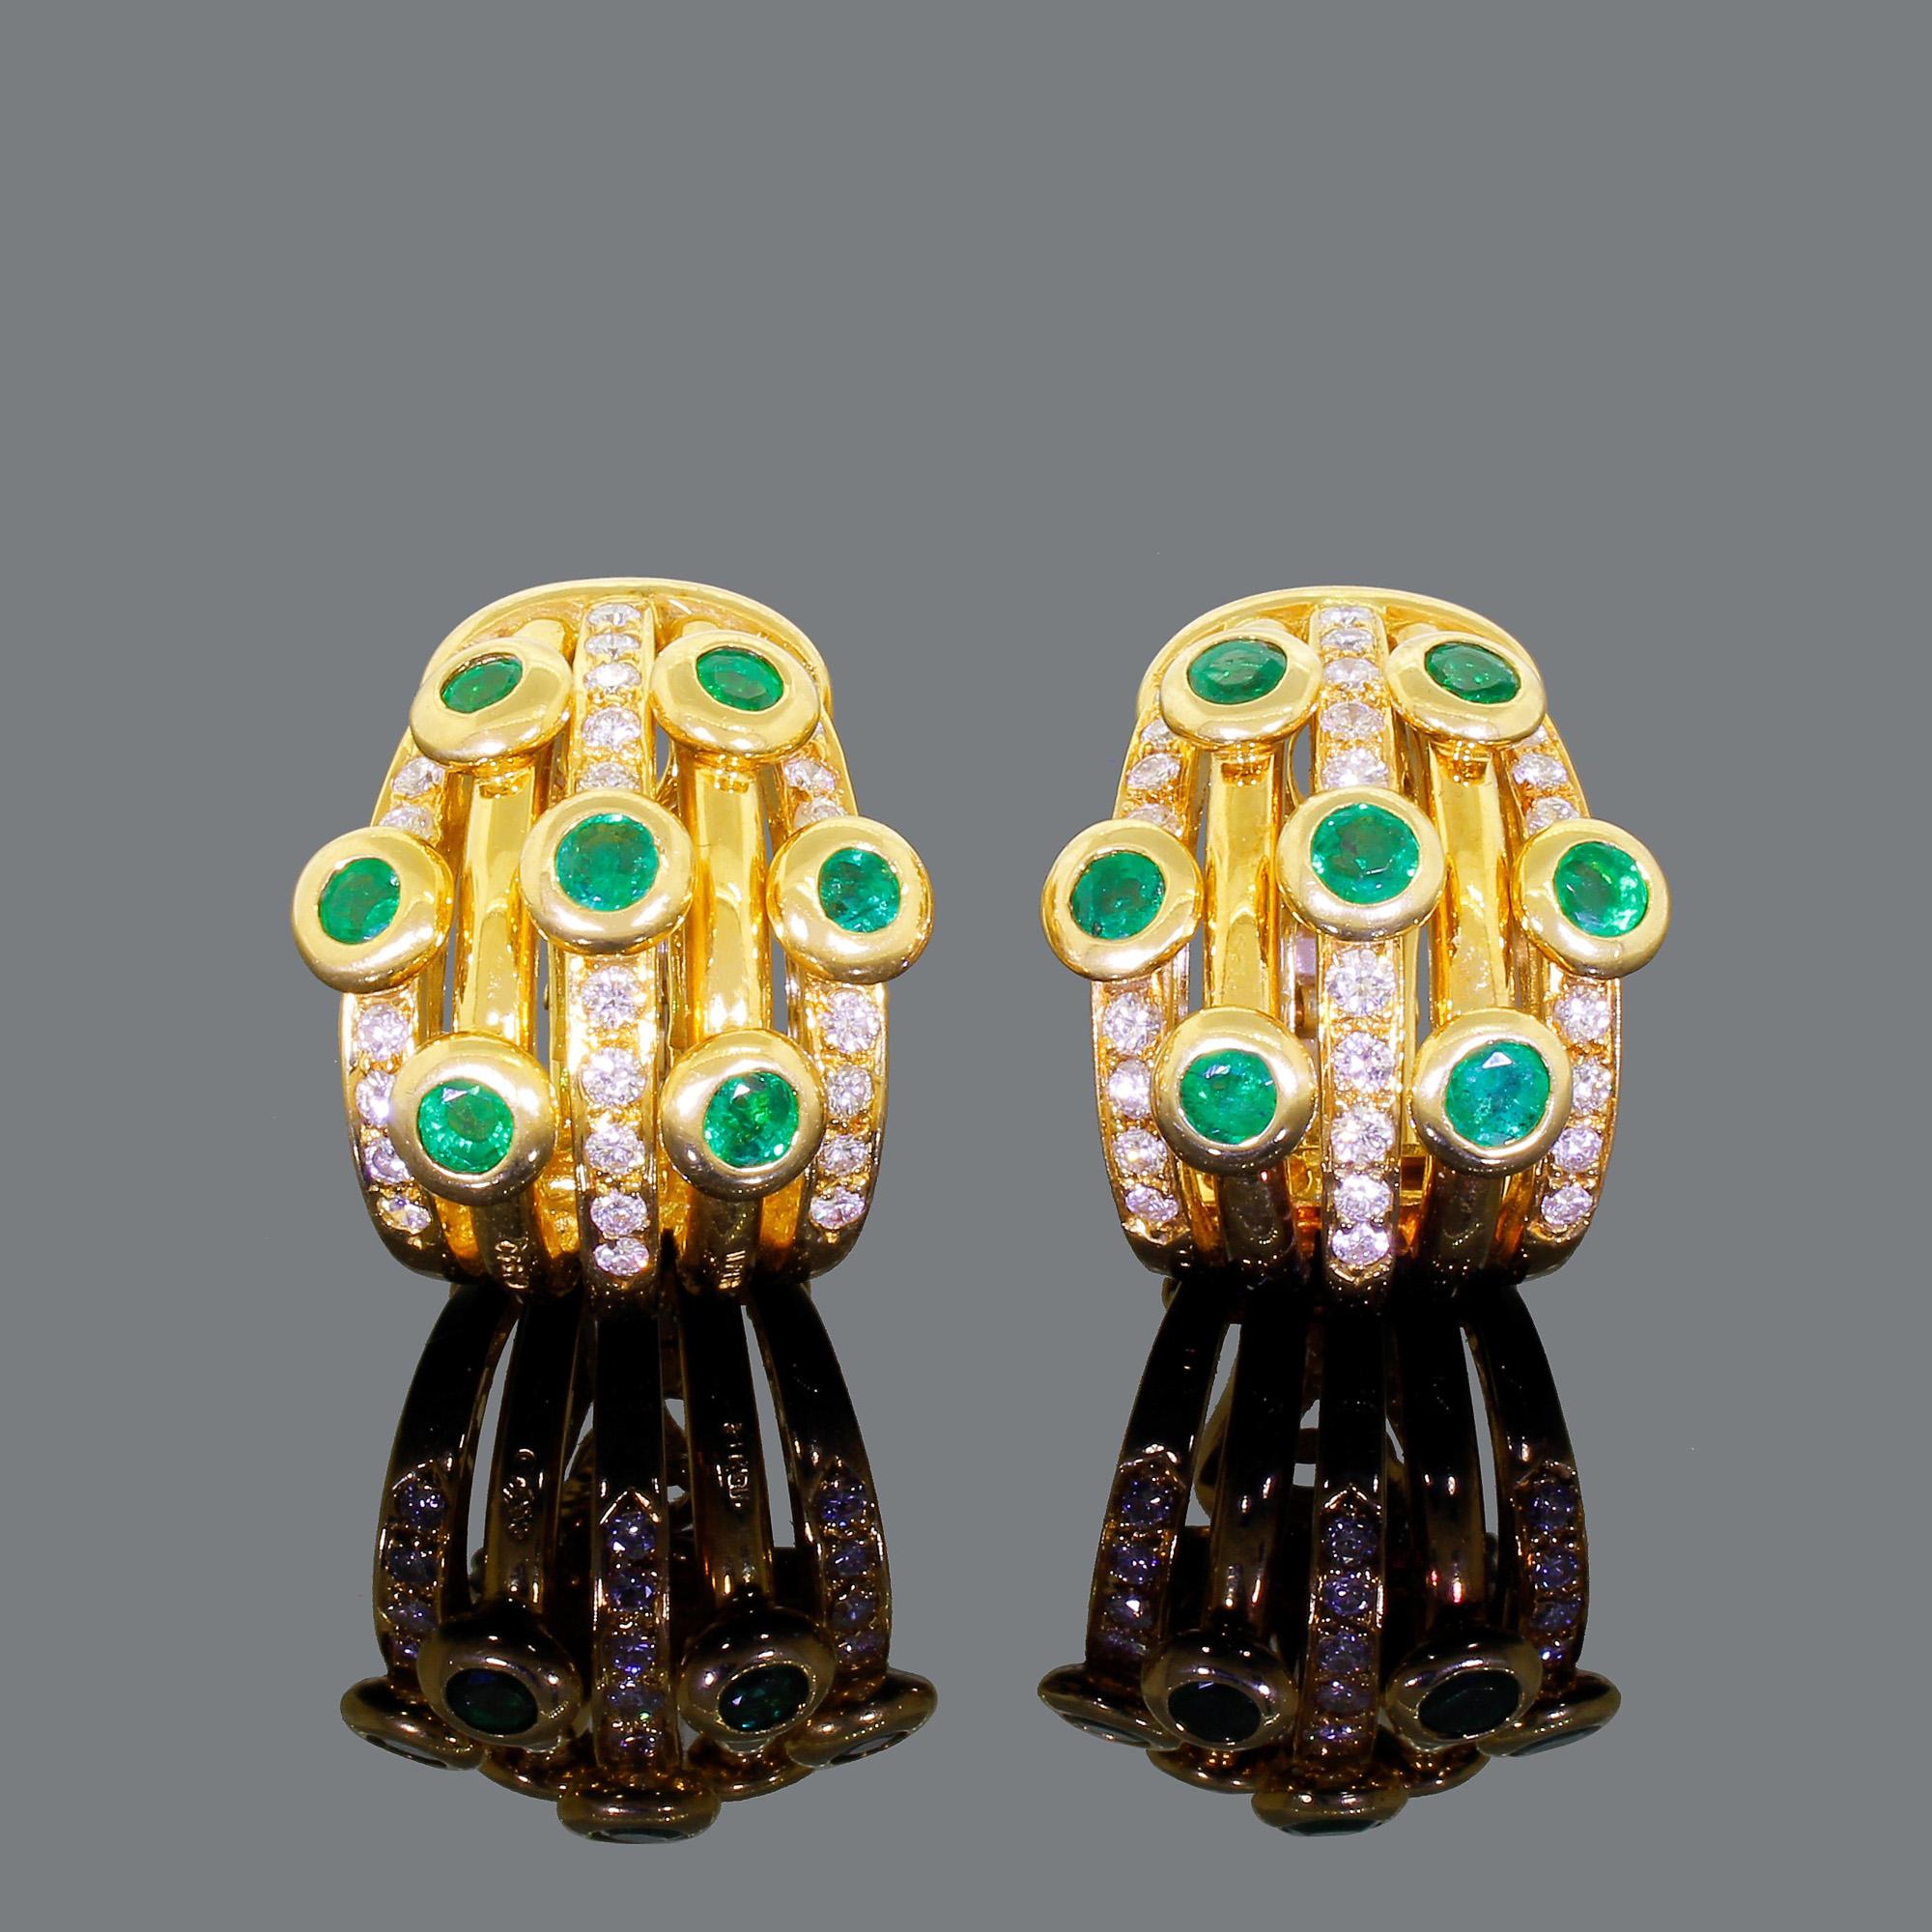 Adler 18k Gold Diamond Emerald Earrings Serail 1990 Classic Couture Clip On 26G For Sale 1